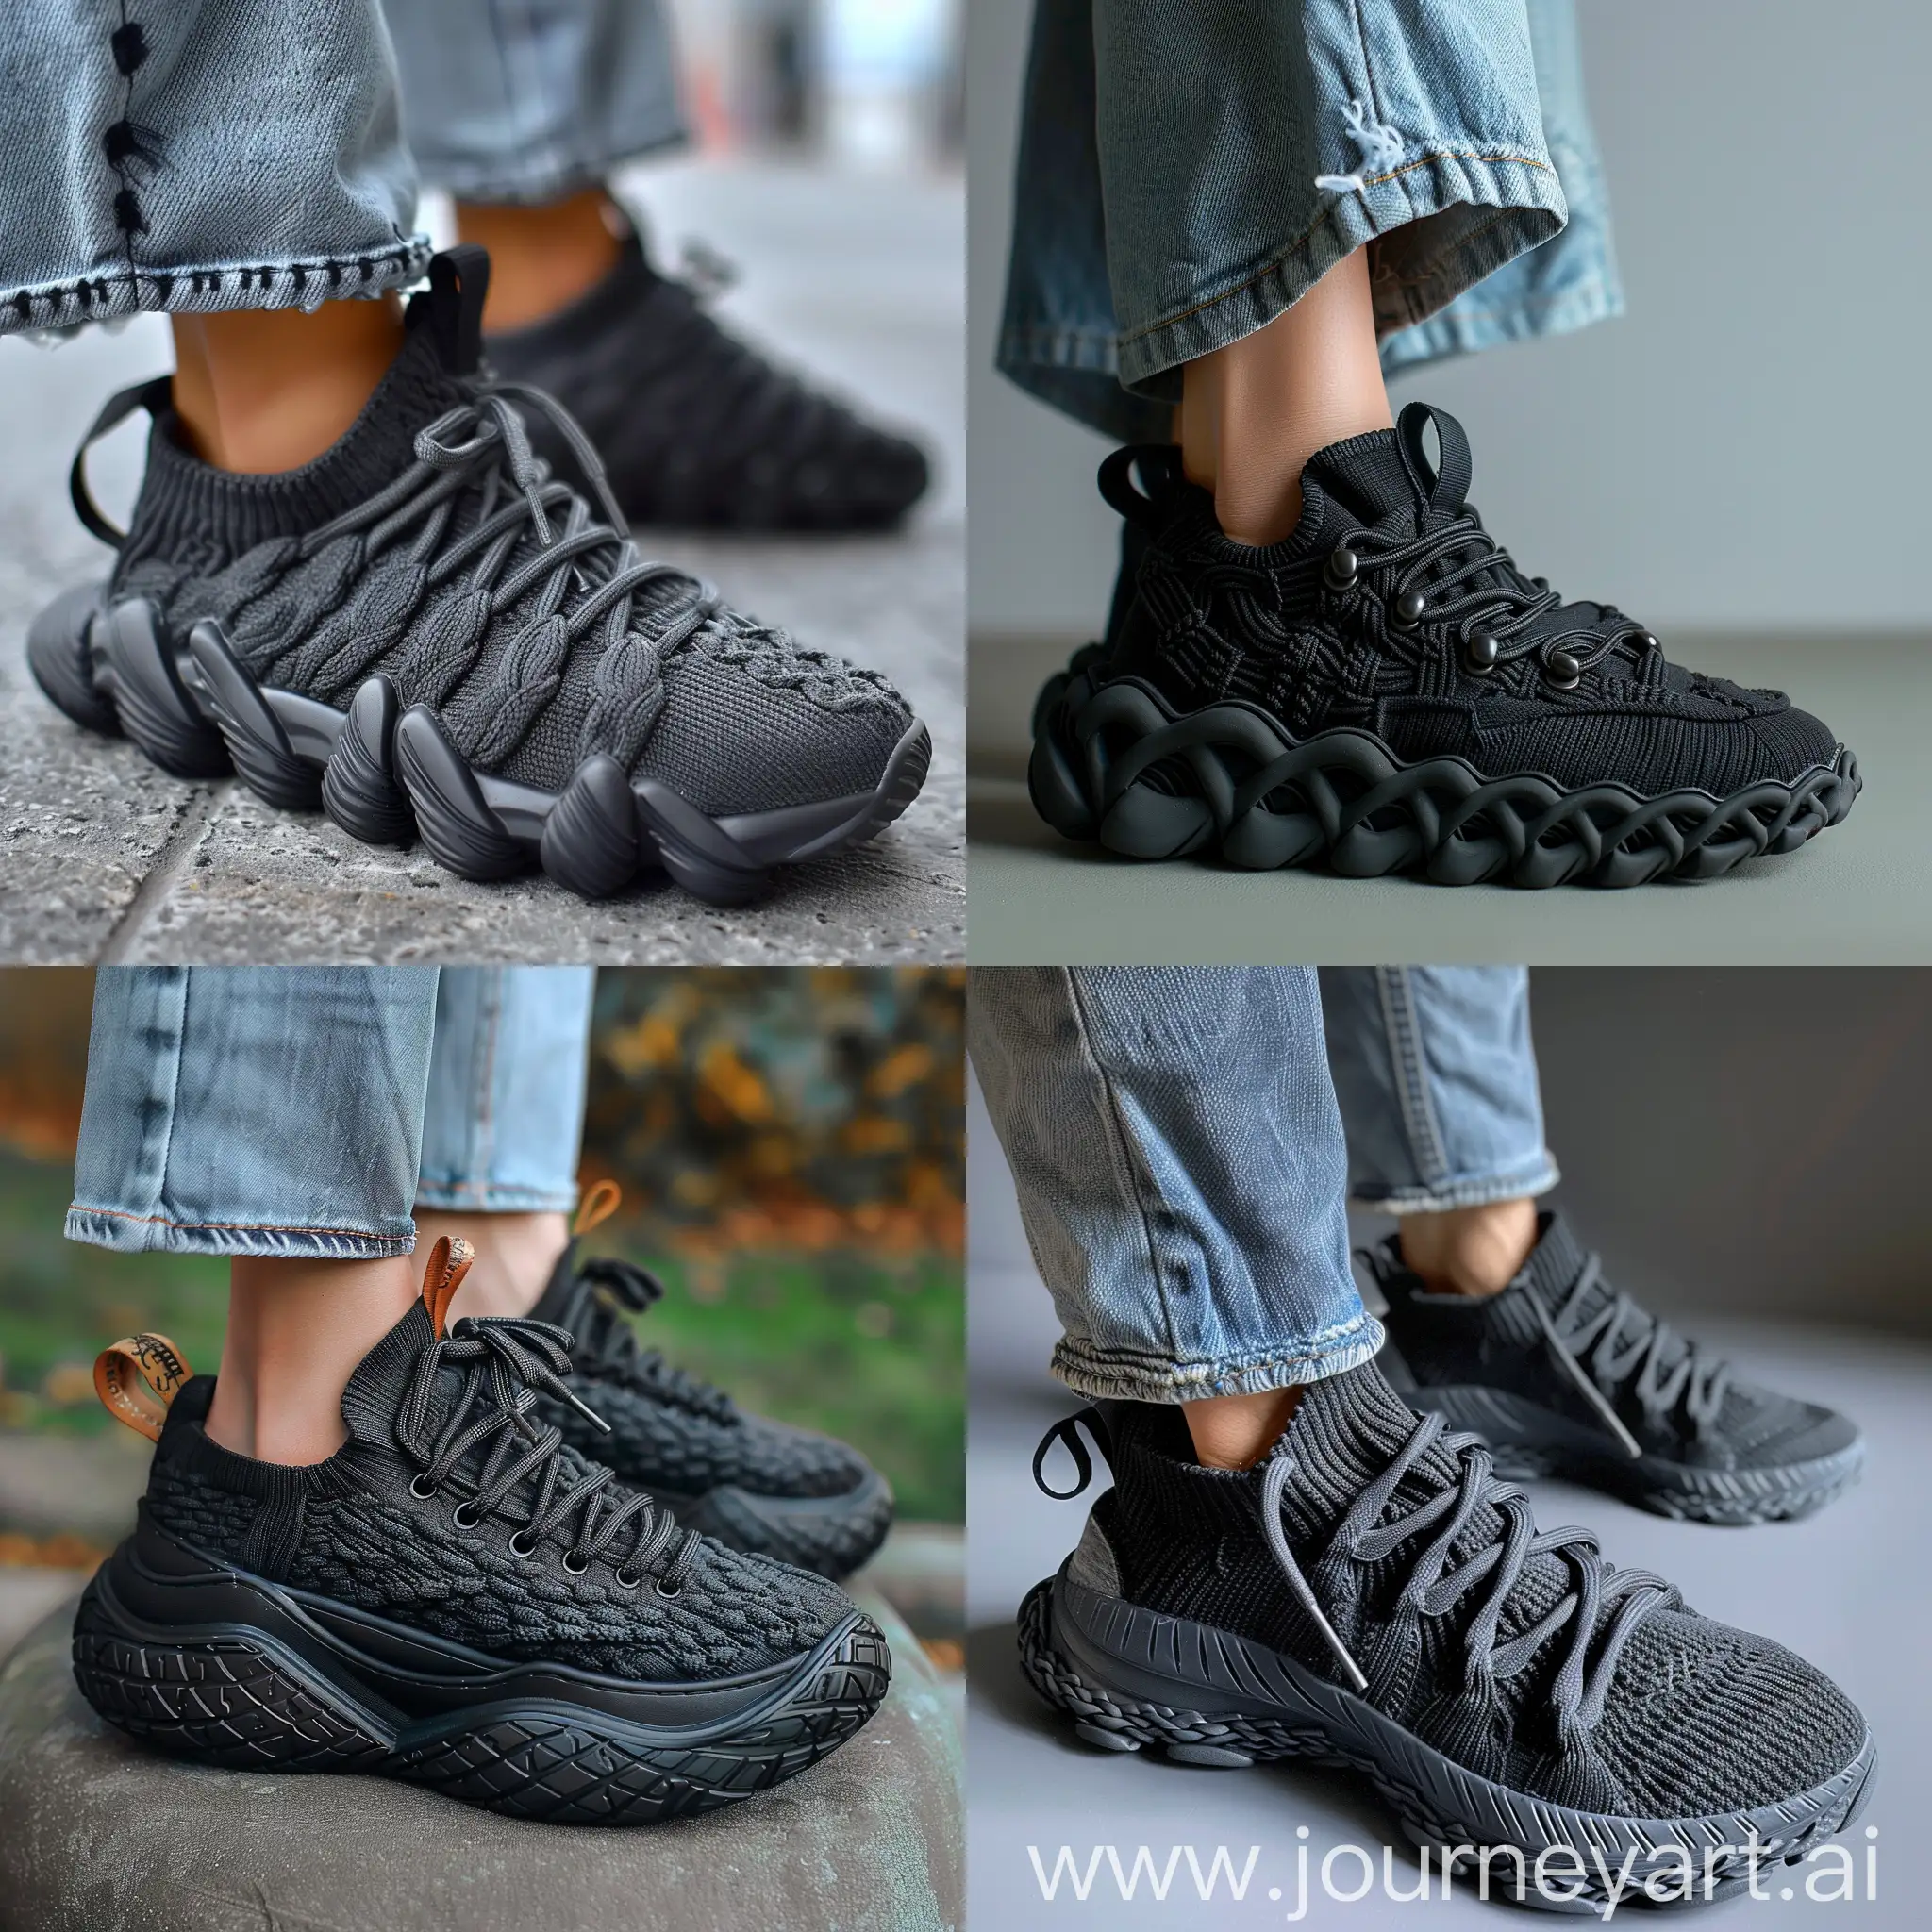 Sneakers design , inspiration by knitted fabrics , some knitted cables on it , rubber midsole , cable knitted on midsole , chunky , trendy , color black , knitted laces , circle of 5 laces around the top of sneakers , person wears wide leg jeans wearing the sneakers